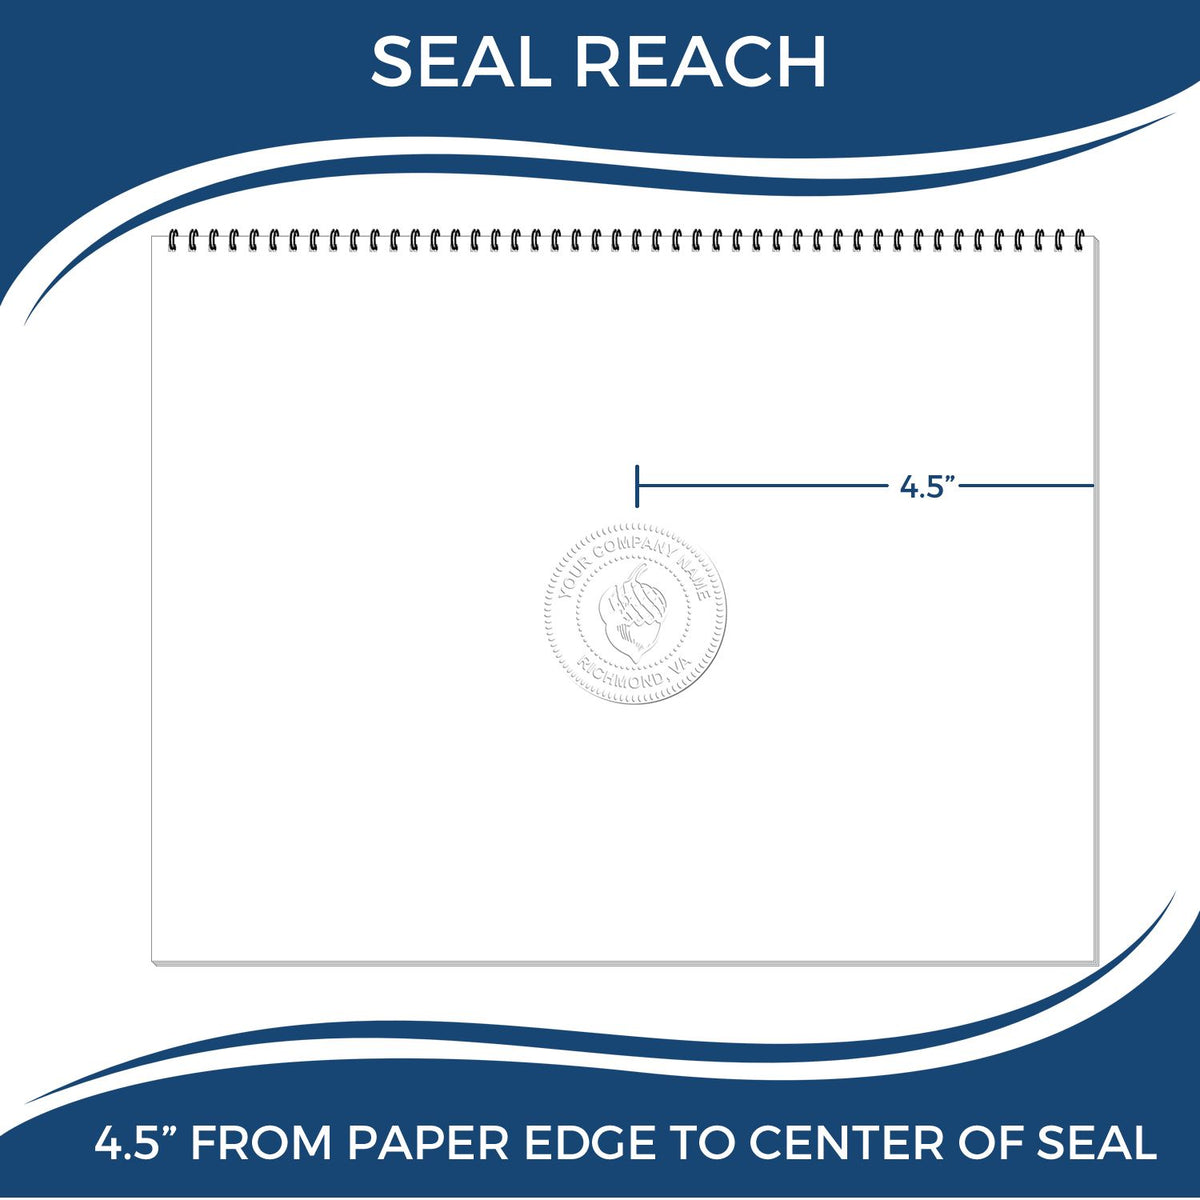 An infographic showing the seal reach which is represented by a ruler and a miniature seal image of the Extended Long Reach Kansas Surveyor Embosser